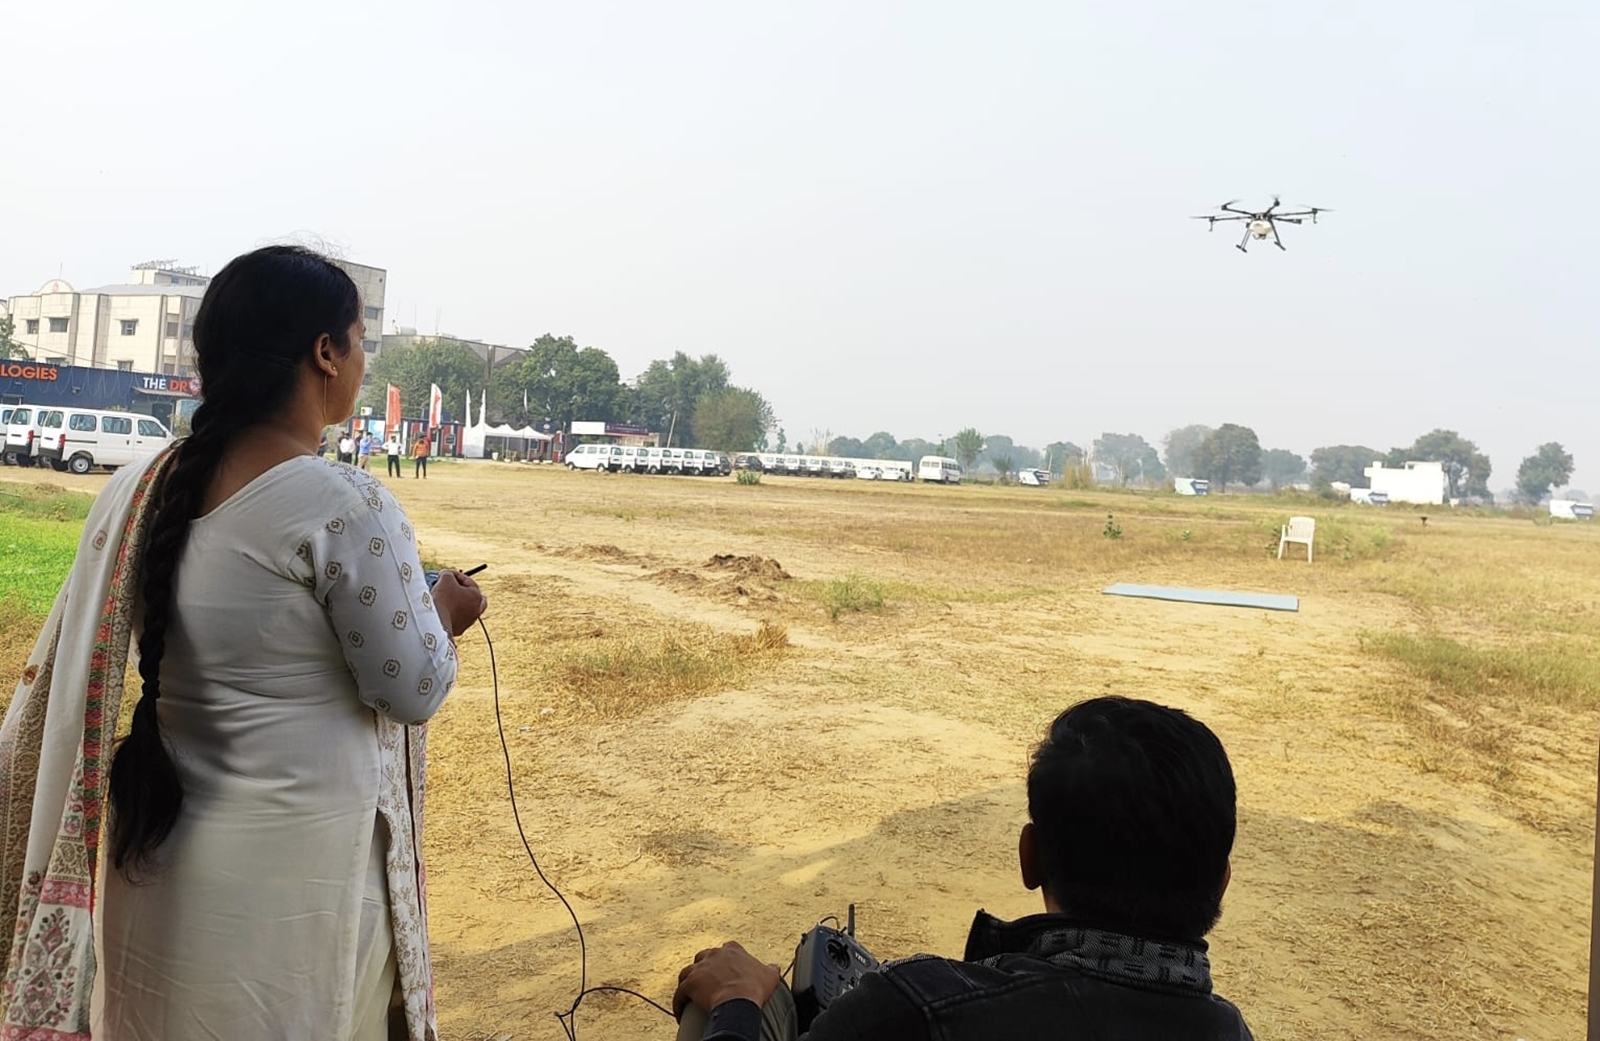 According to the estimates prepared by IFFCO, the scheme is expected to generate an income of at least Rs 7 lakh per annum for the Drone Didis